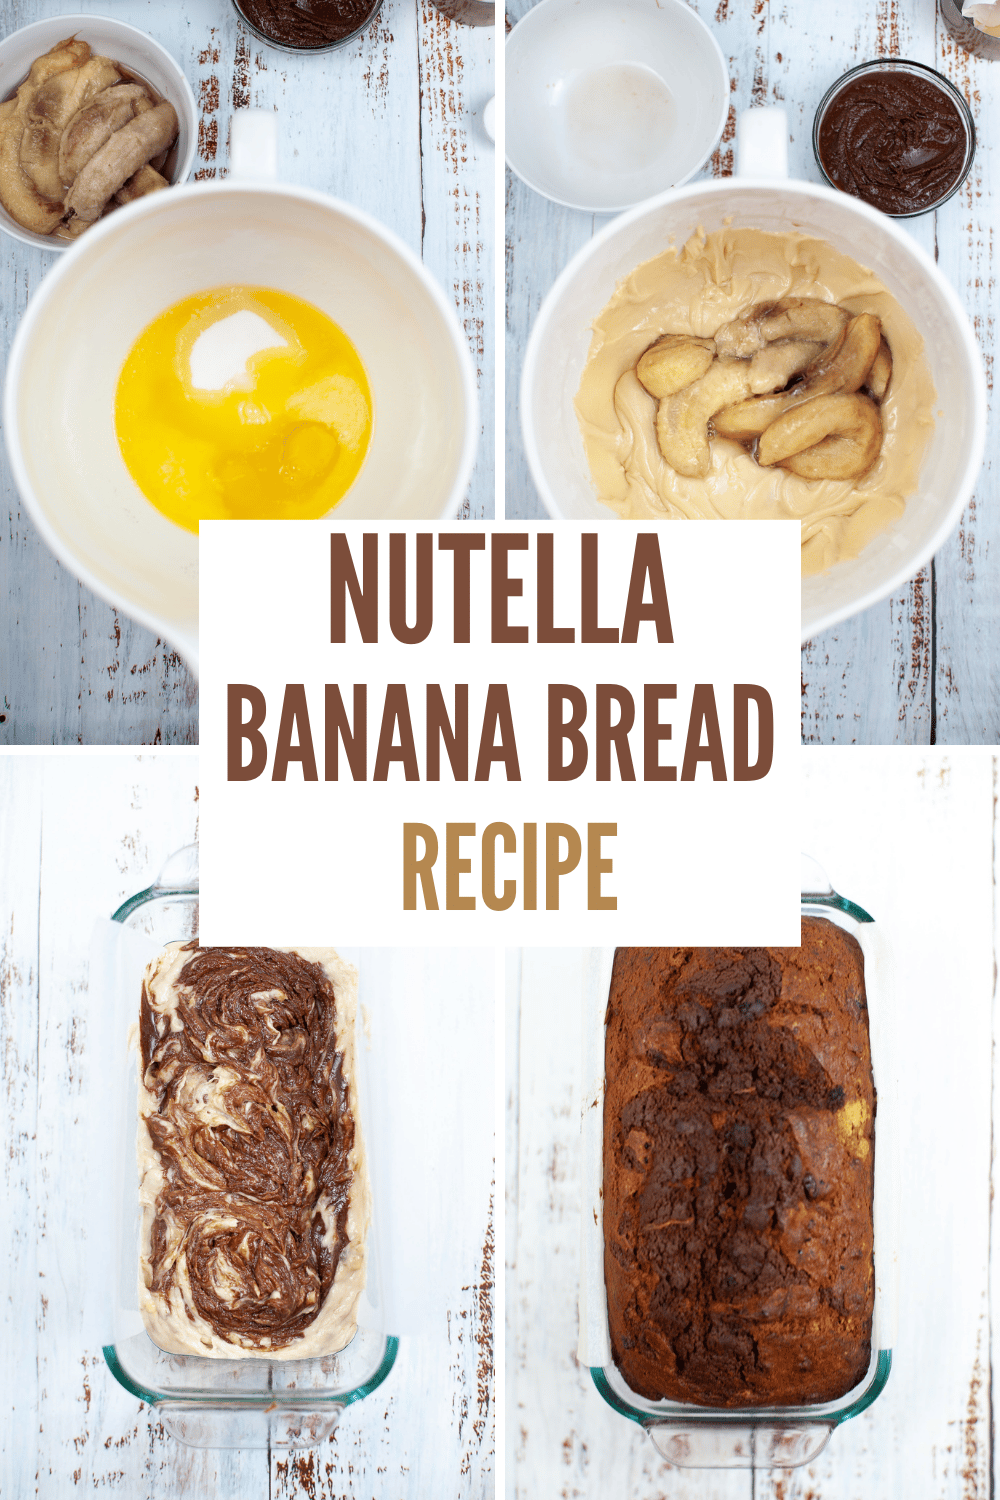 This Nutella Banana Bread recipe is moist, tender, and full of banana and Nutella flavor. An easy quick bread recipe perfect for breakfast! #nutellabananbreadrecipe #nutella #bananabread #breakfast via @wondermomwannab